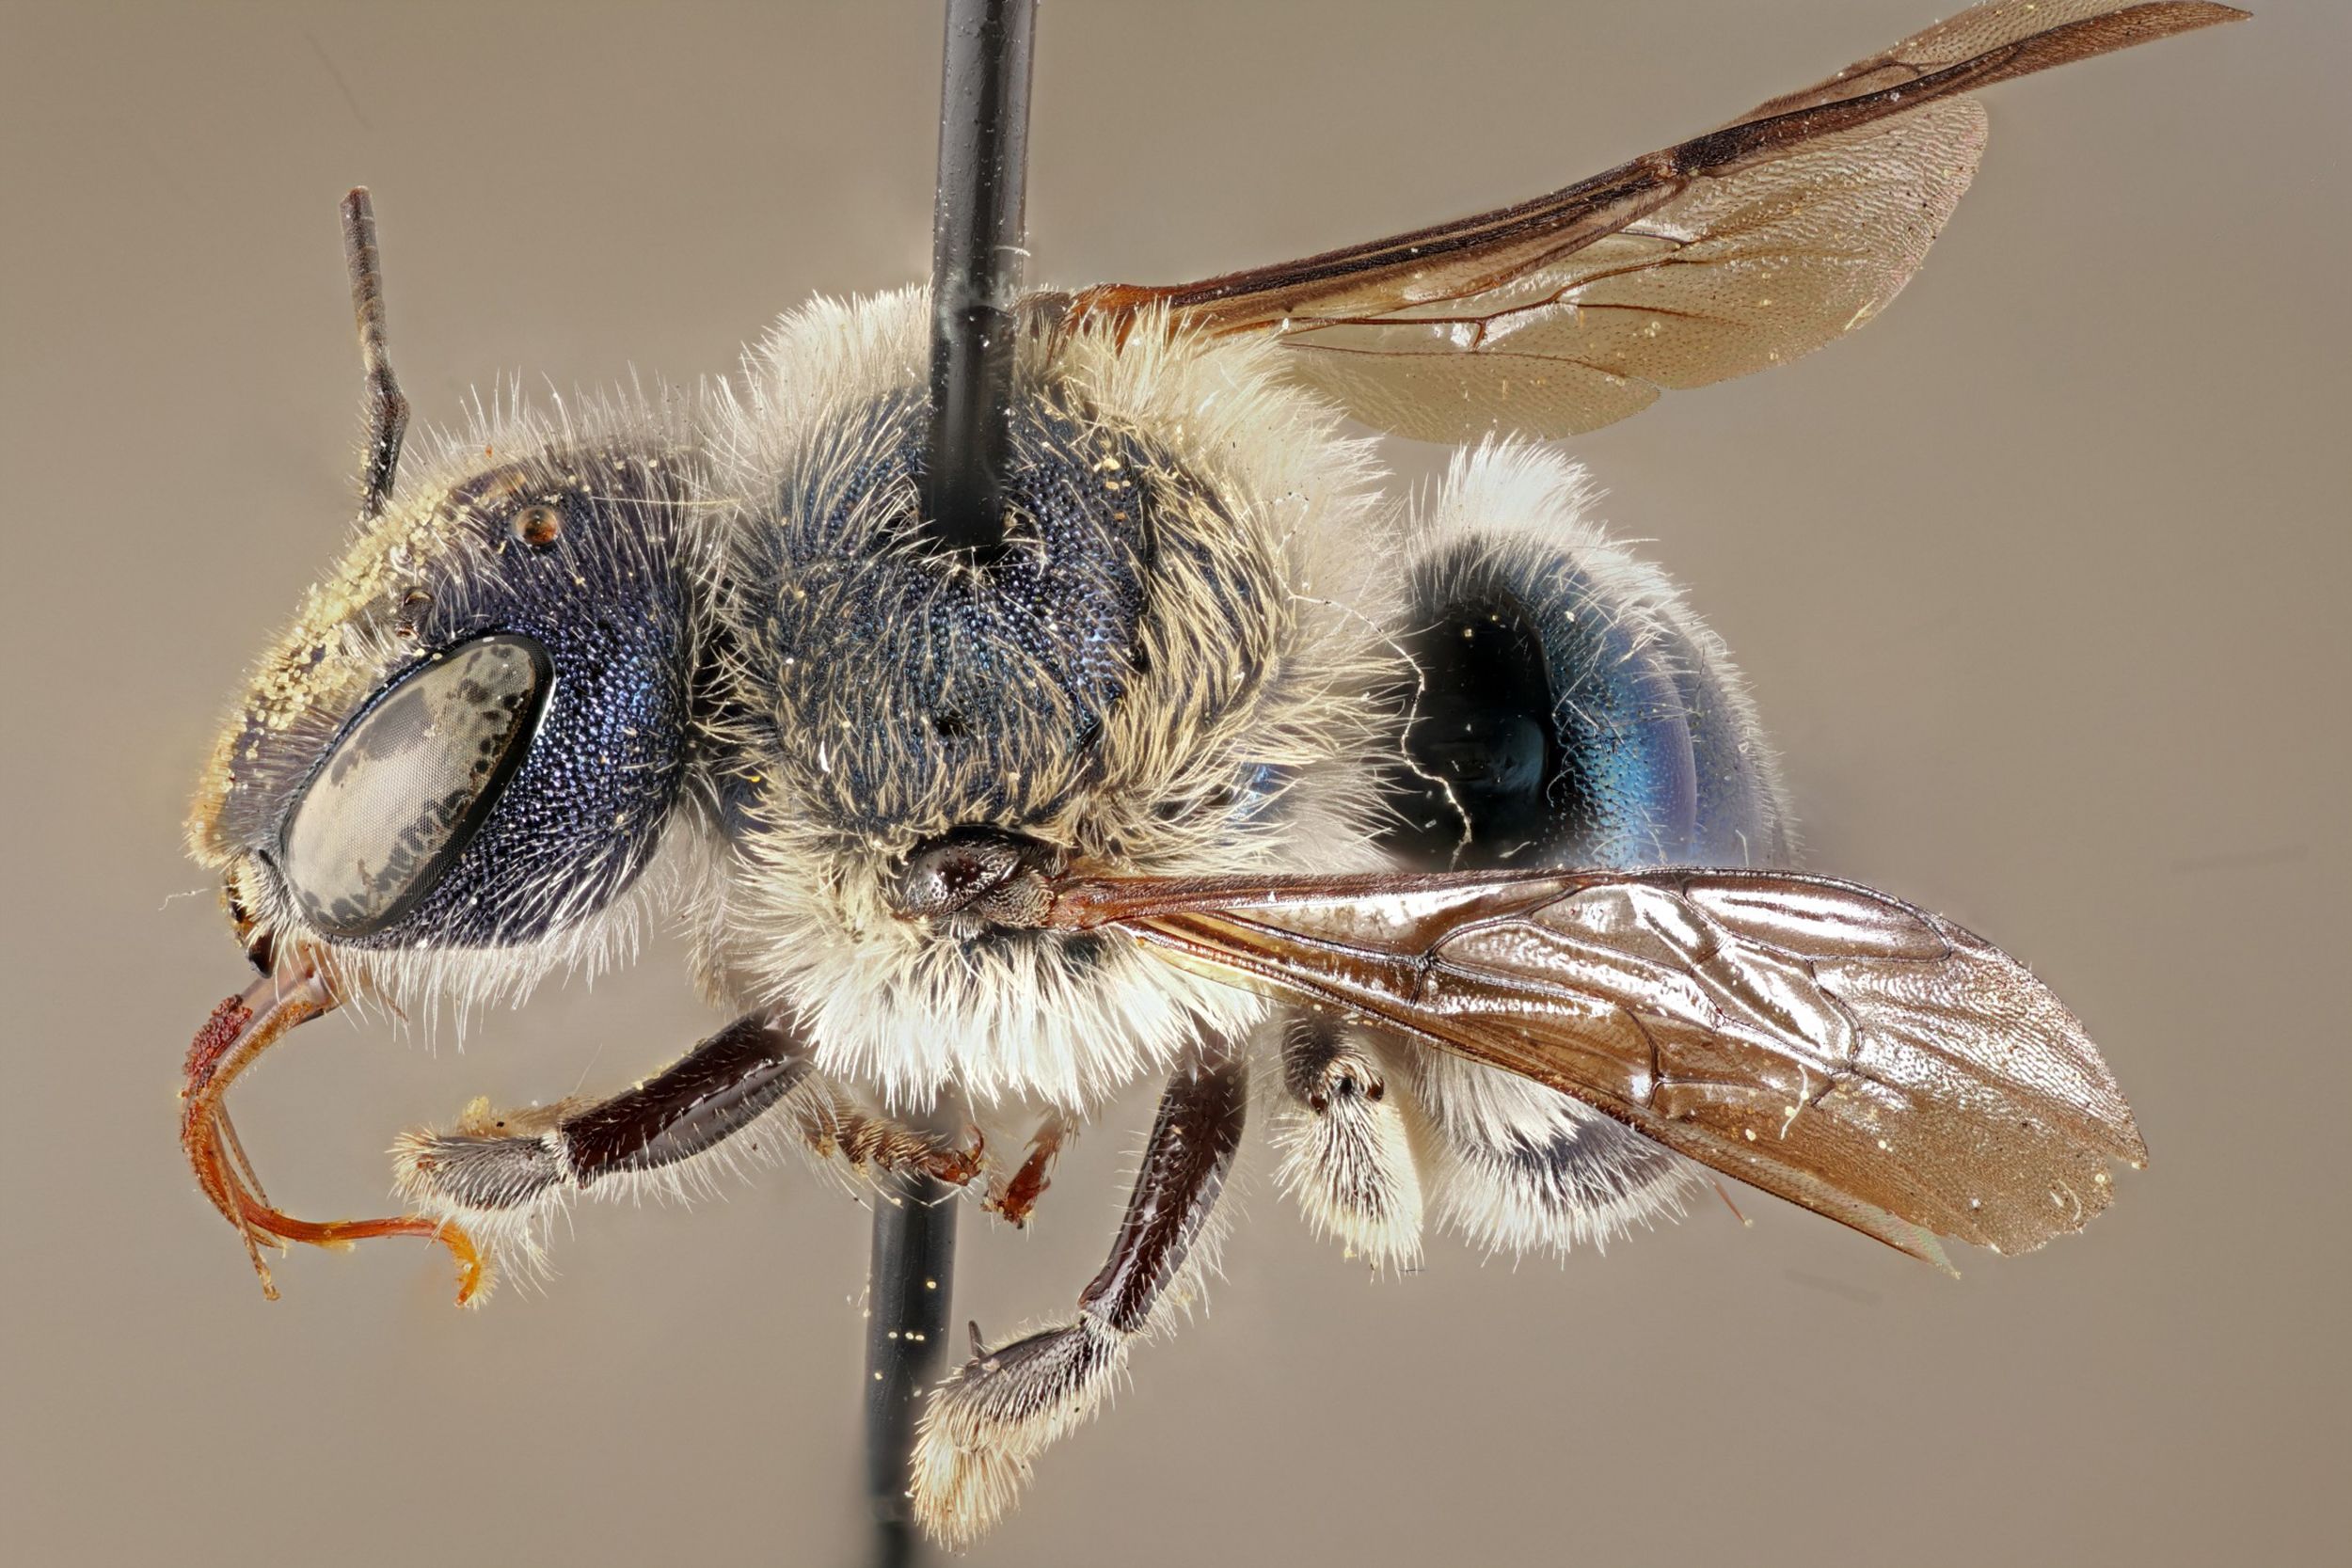 The World's Largest Bee Is Not Extinct - The New York Times